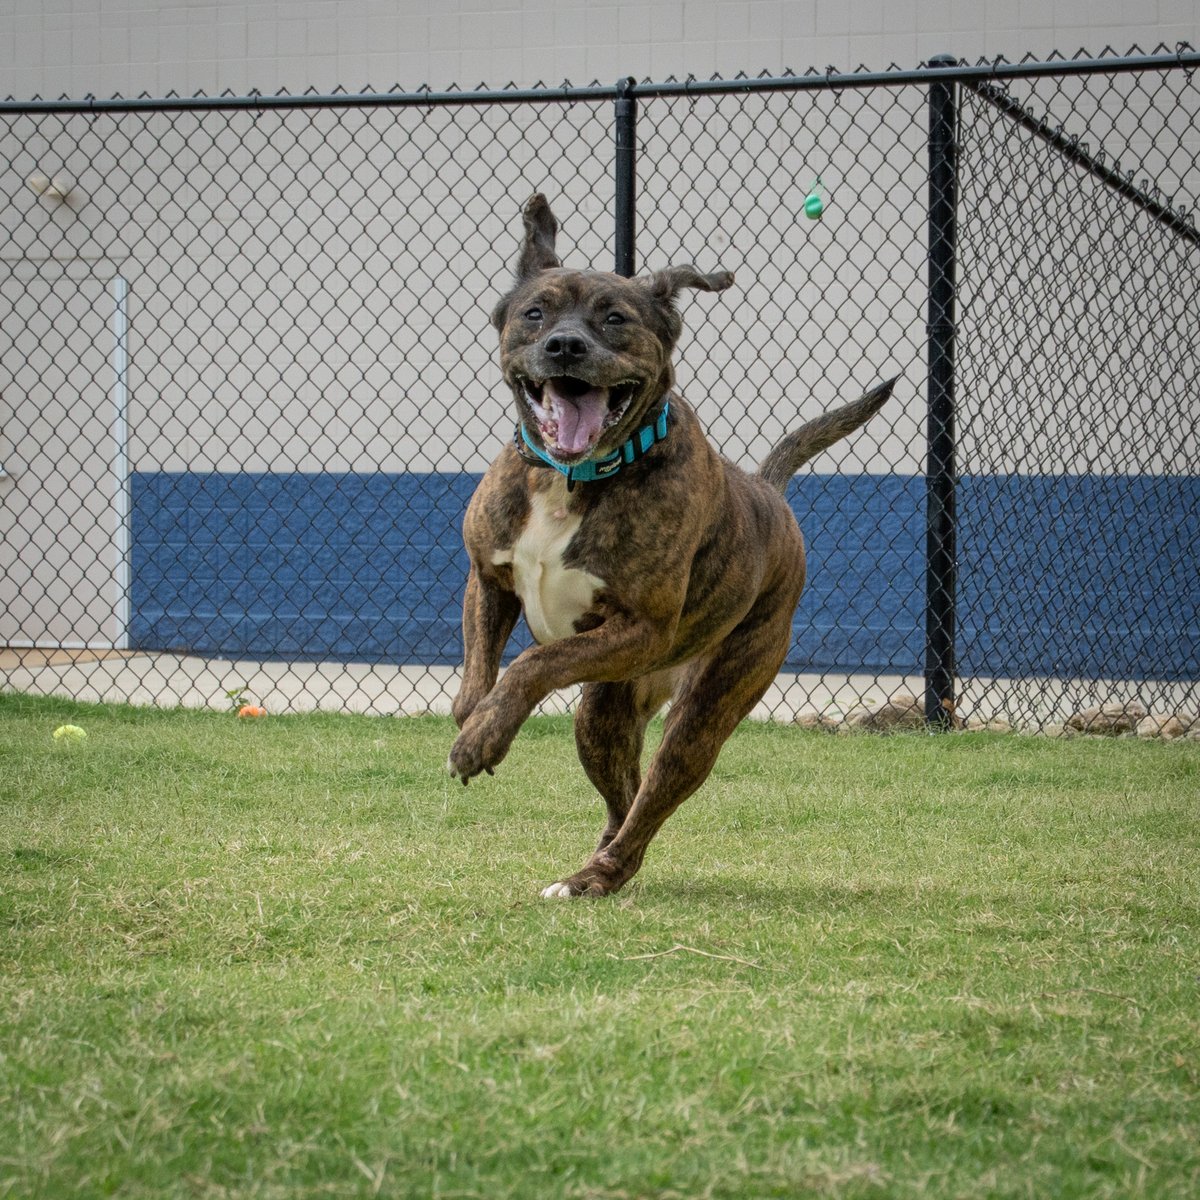 Meet this AWESOME girl named Glenda! She loves playing fetch and is really good at it! She also likes attention and gets along really well with other dogs out in playgroup! Come meet Glenda at Anderson County PAWS, open M, T, Th, F & Sat. 12 - 5!

#AndersonCountyPAWS #dog #adopt